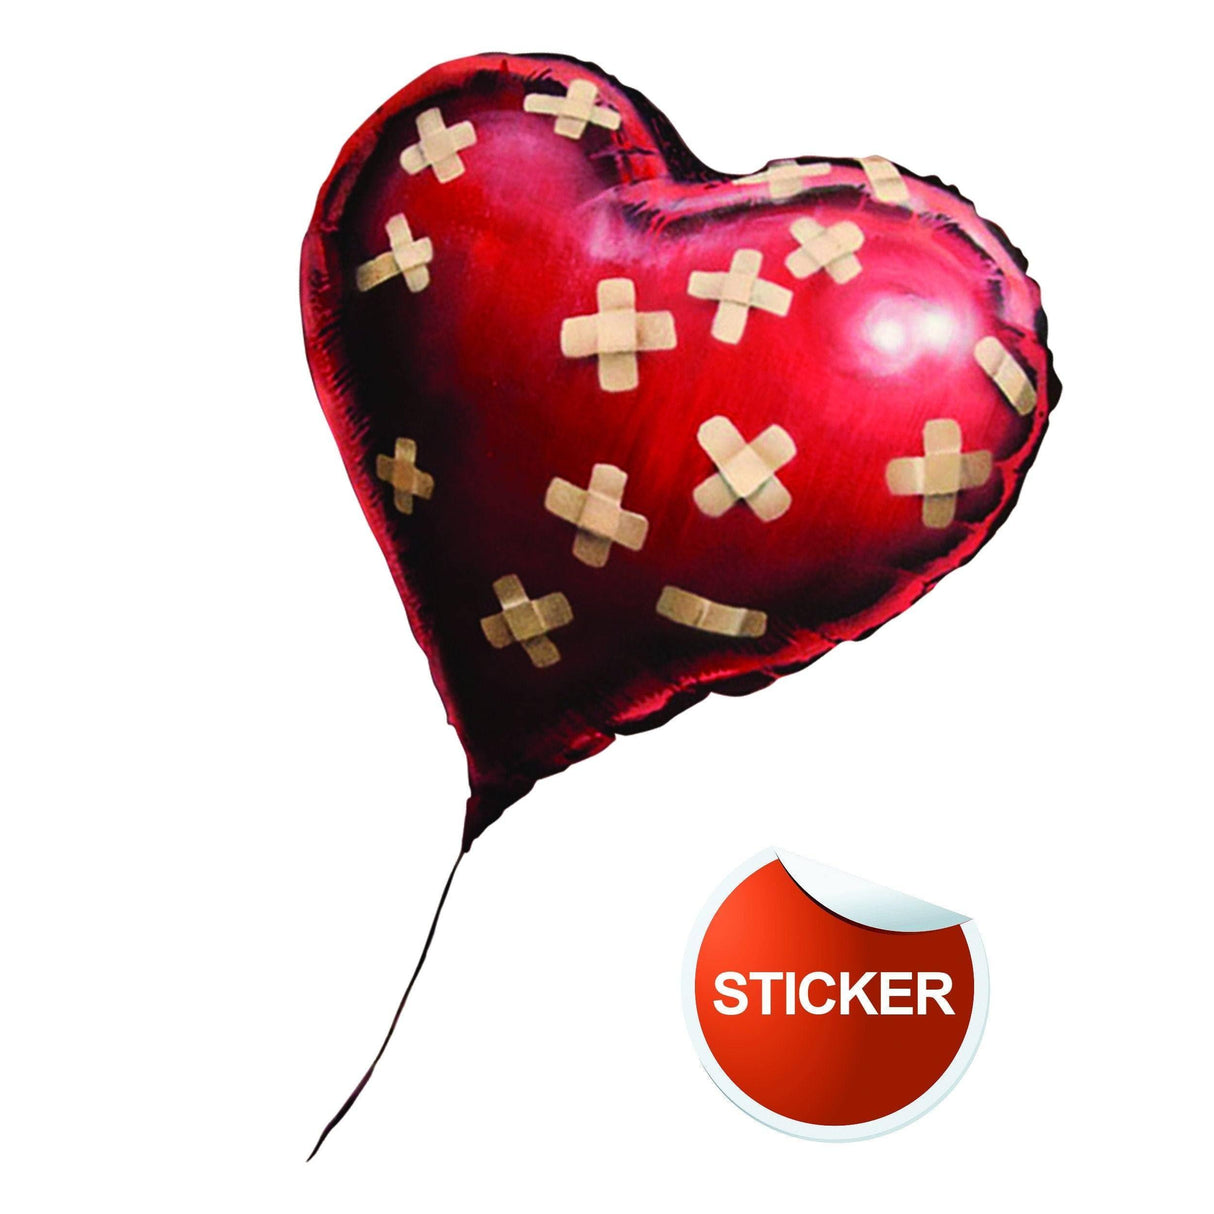 Banksy Heart Balloon Vinyl Wall Sticker - Art Home Decor Cool And Premium Waterproof Decal - Adult Graffiti With Quality Keen Bansky Laptop - Decords